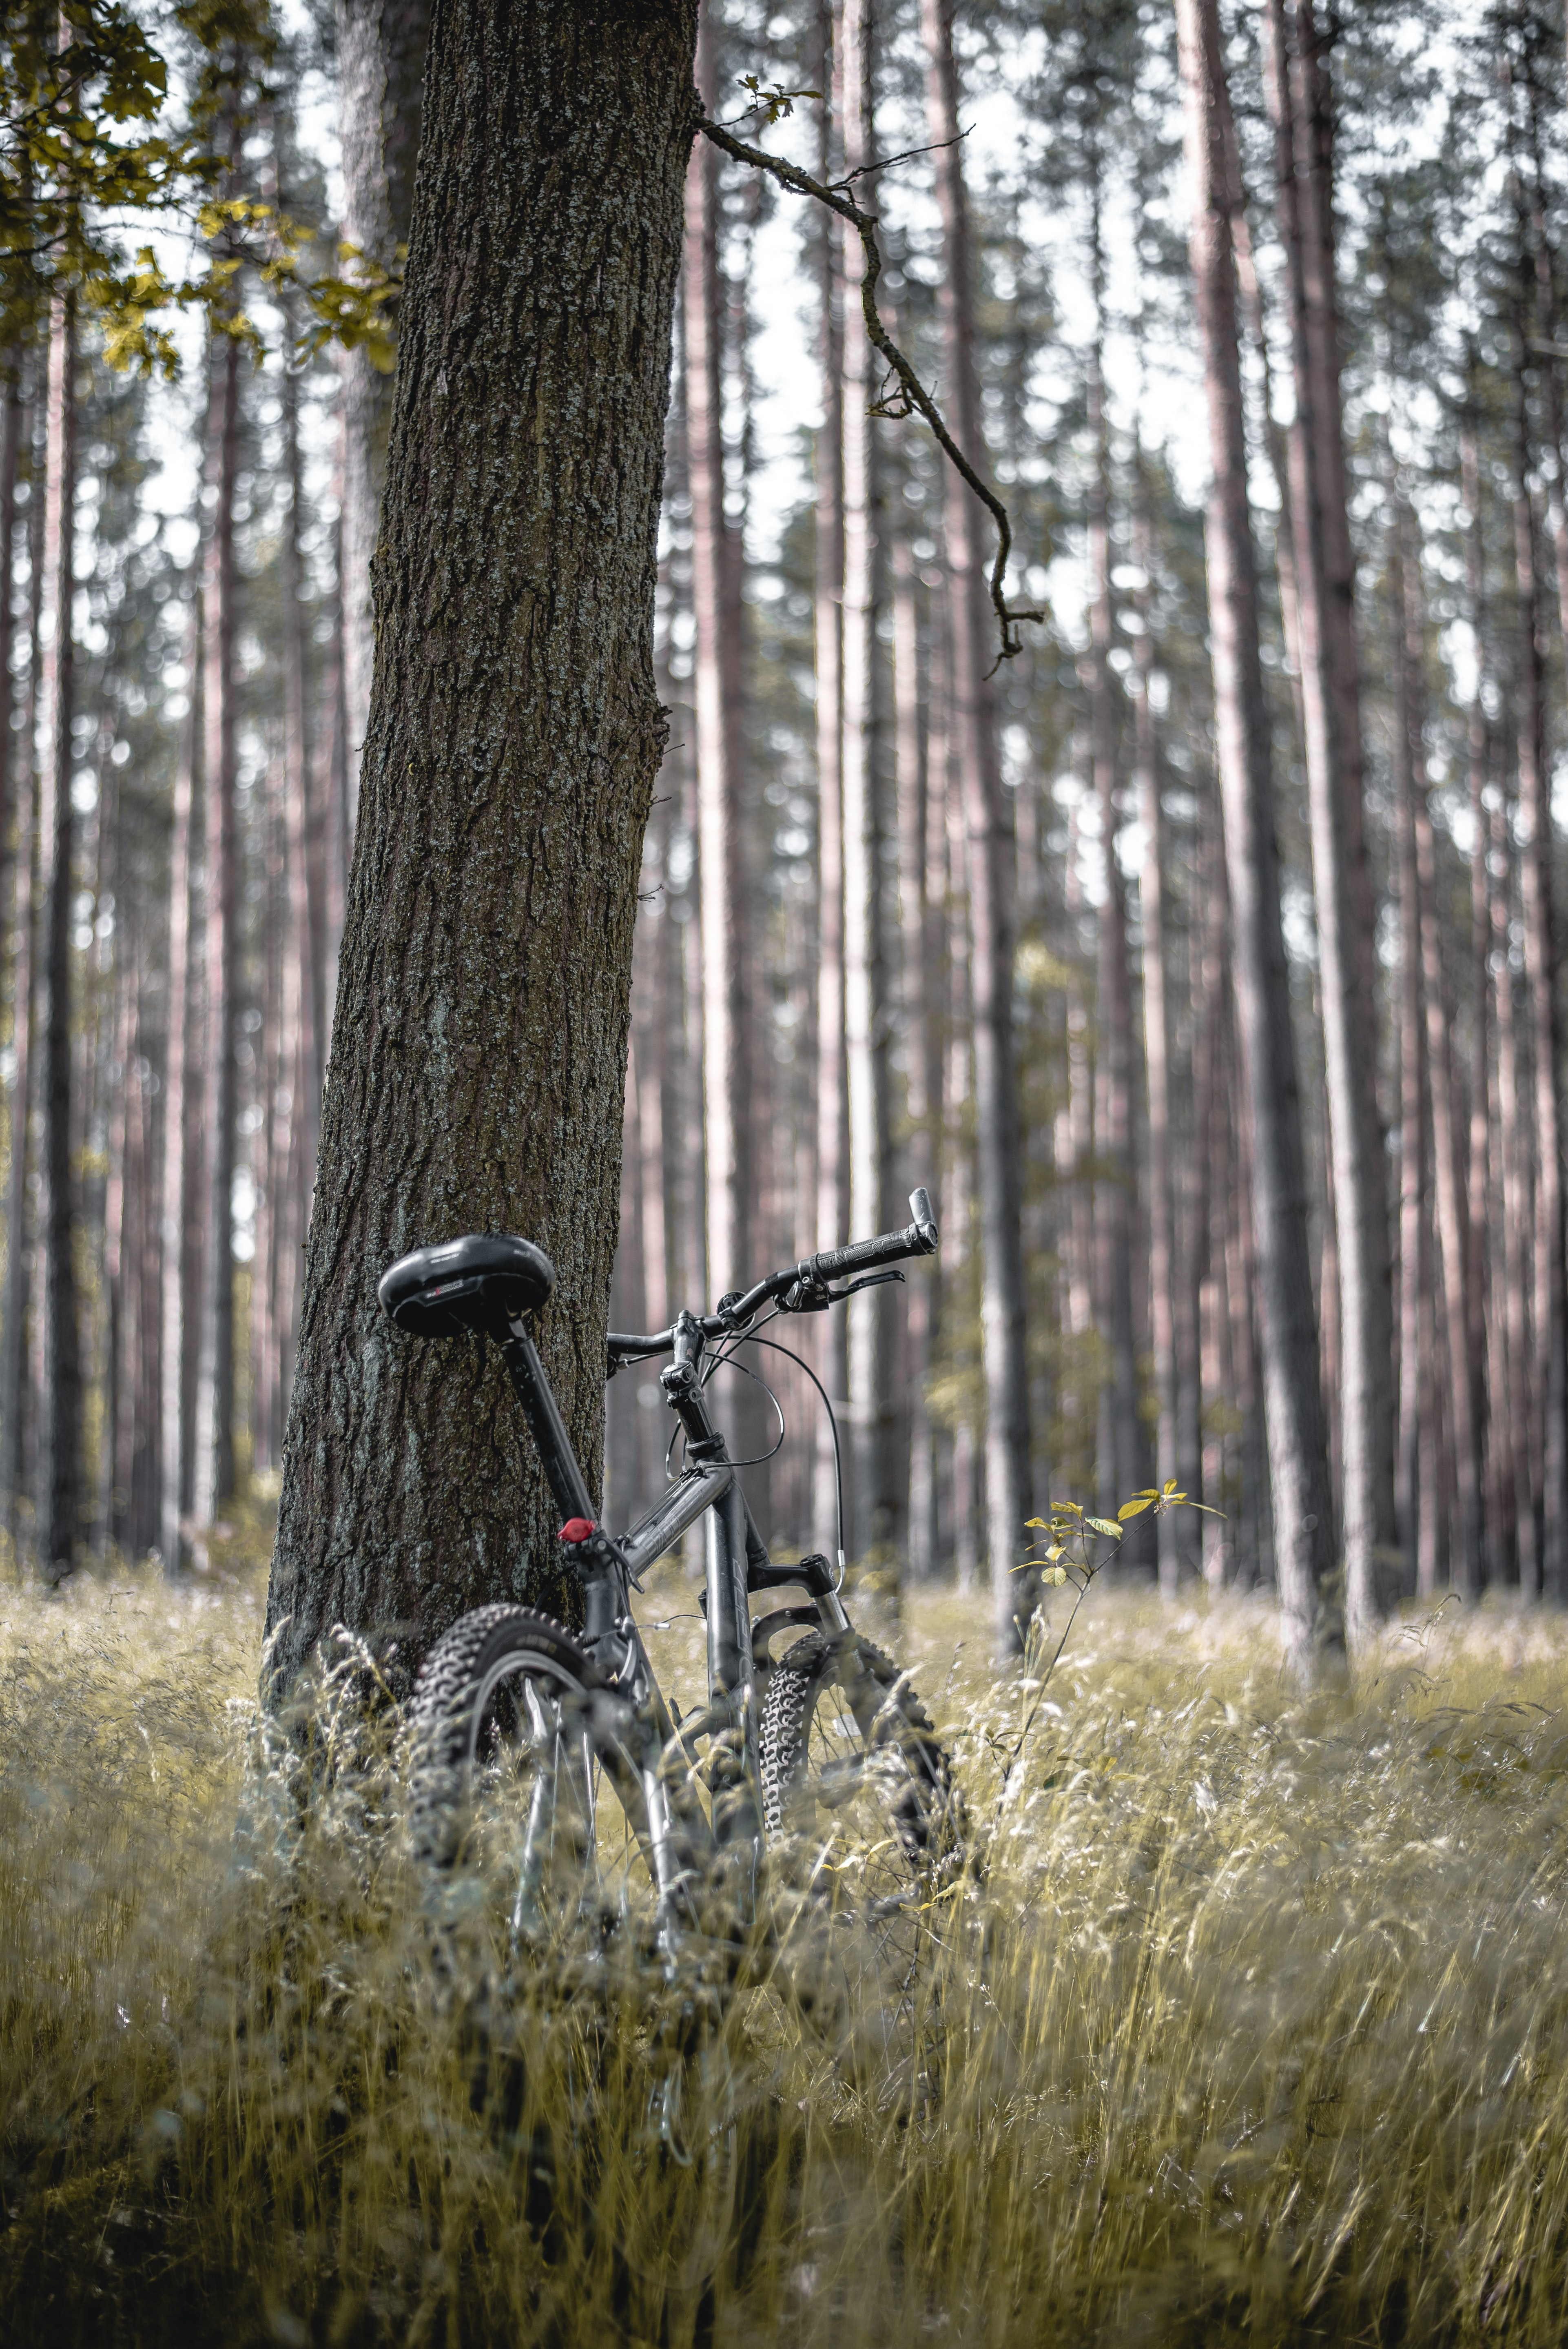 miscellaneous, trees, miscellanea, forest, stroll, bicycle UHD